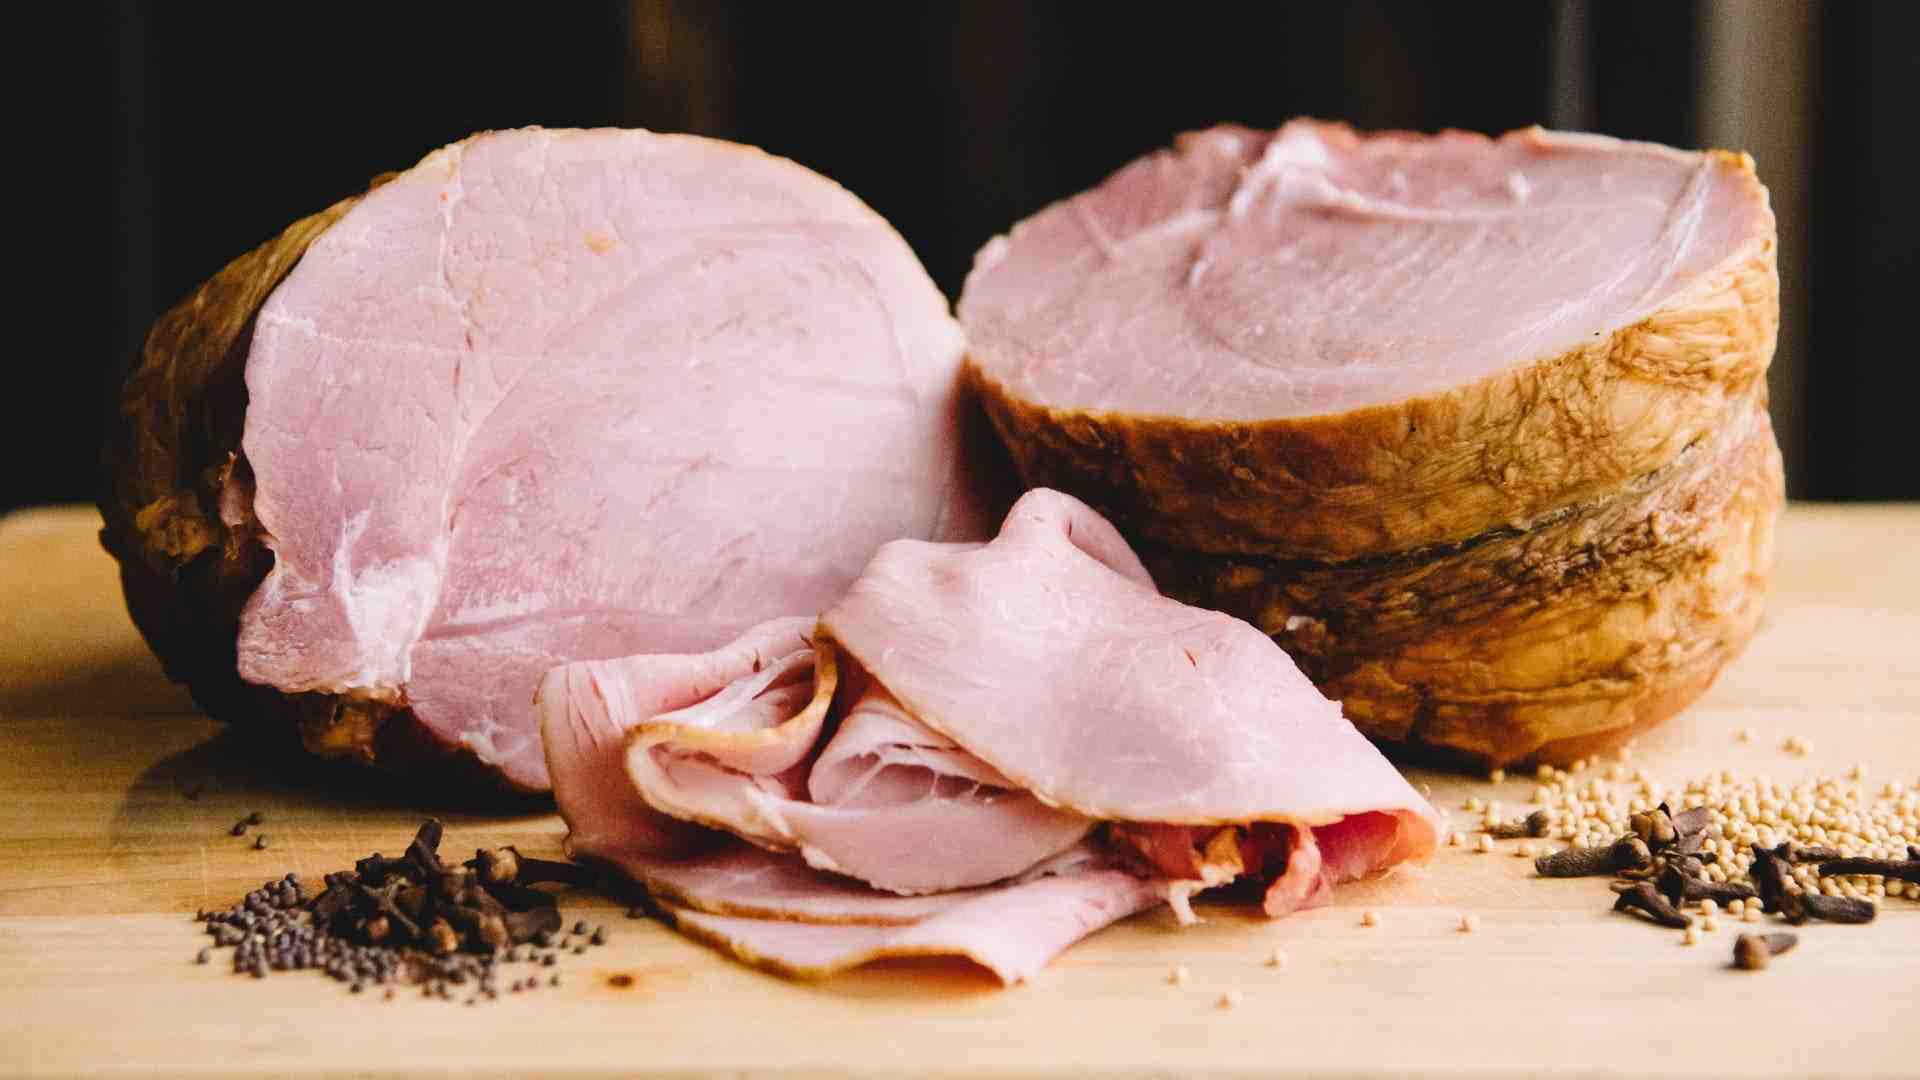 How do I know if my ham is raw or cooked?